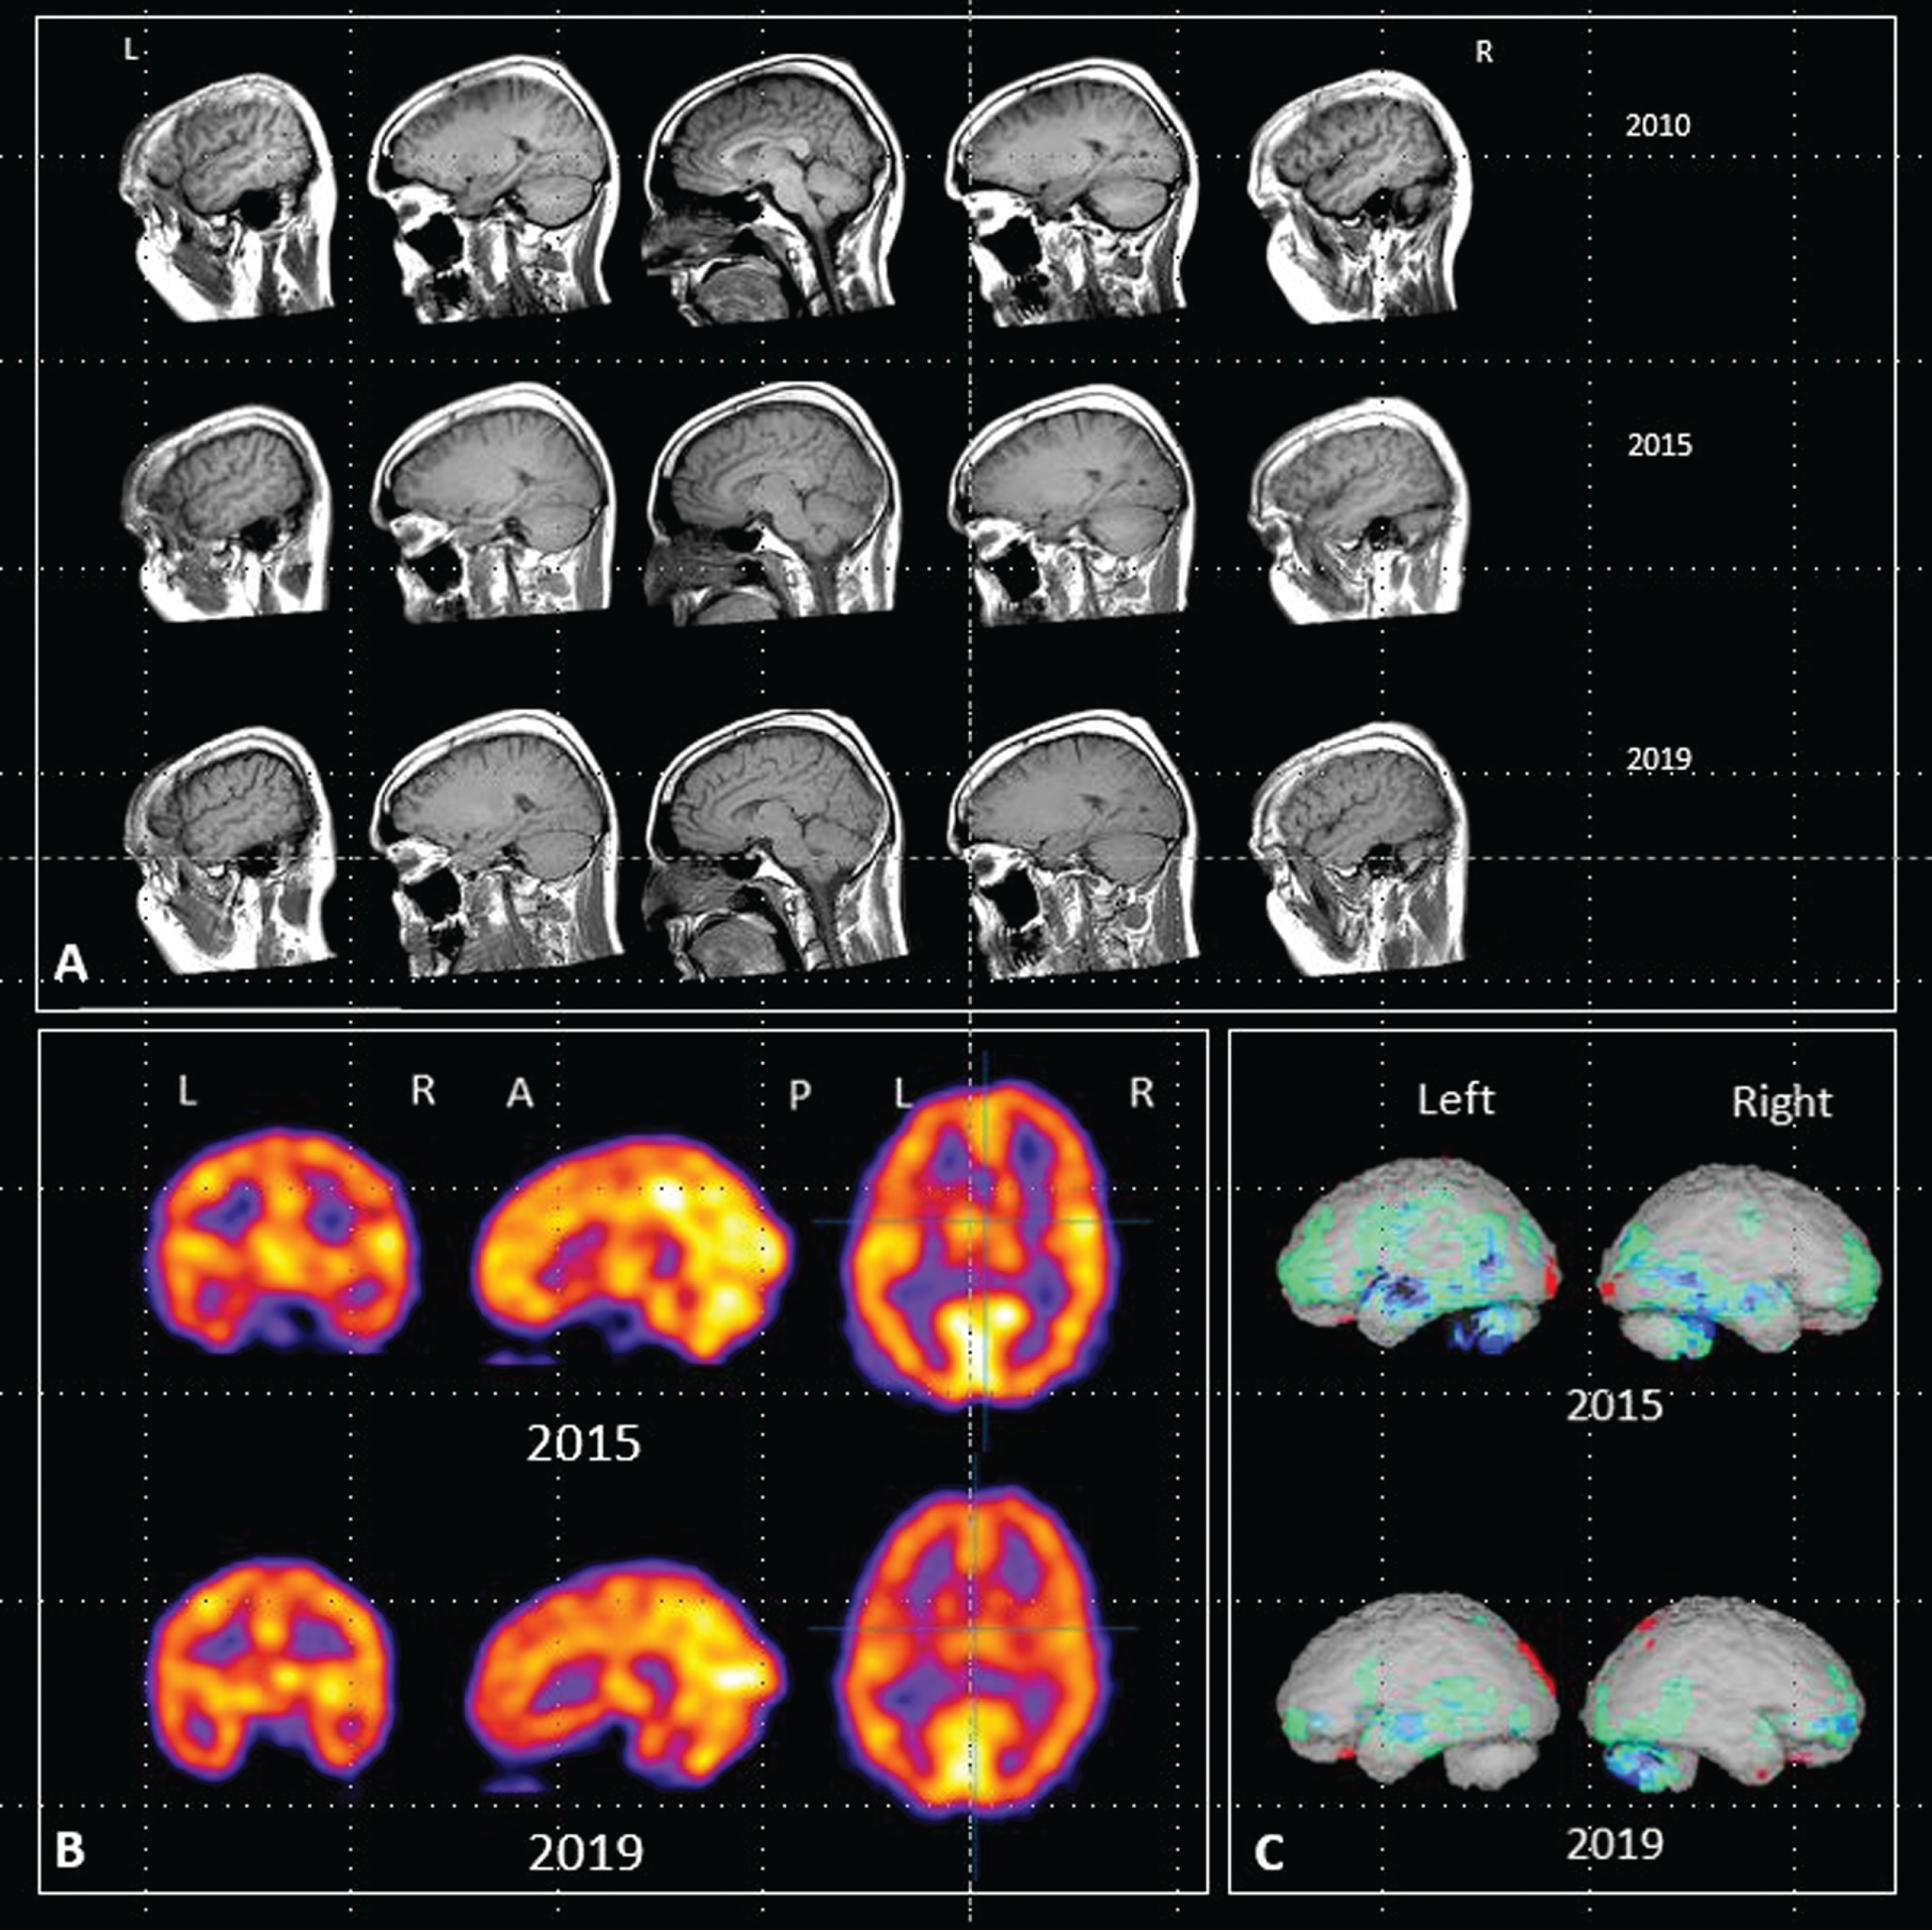 A) Sagittal MRI images acquired in 2010, 2015 and 2019. B) HMPAO-SPECT scan images acquired in 2015 and 2019. C) Rendered images using NeuroGamTM (http://www.segamicorp.com) outputs showing Z scores from the normal range of a control group aged 16 to 45 years with data normalized to cerebellum. Green represents >2 standard deviations below the mean, light blue > 3, dark blue > 4, black > 5. Red represents greater than 2 standard deviations above the mean.